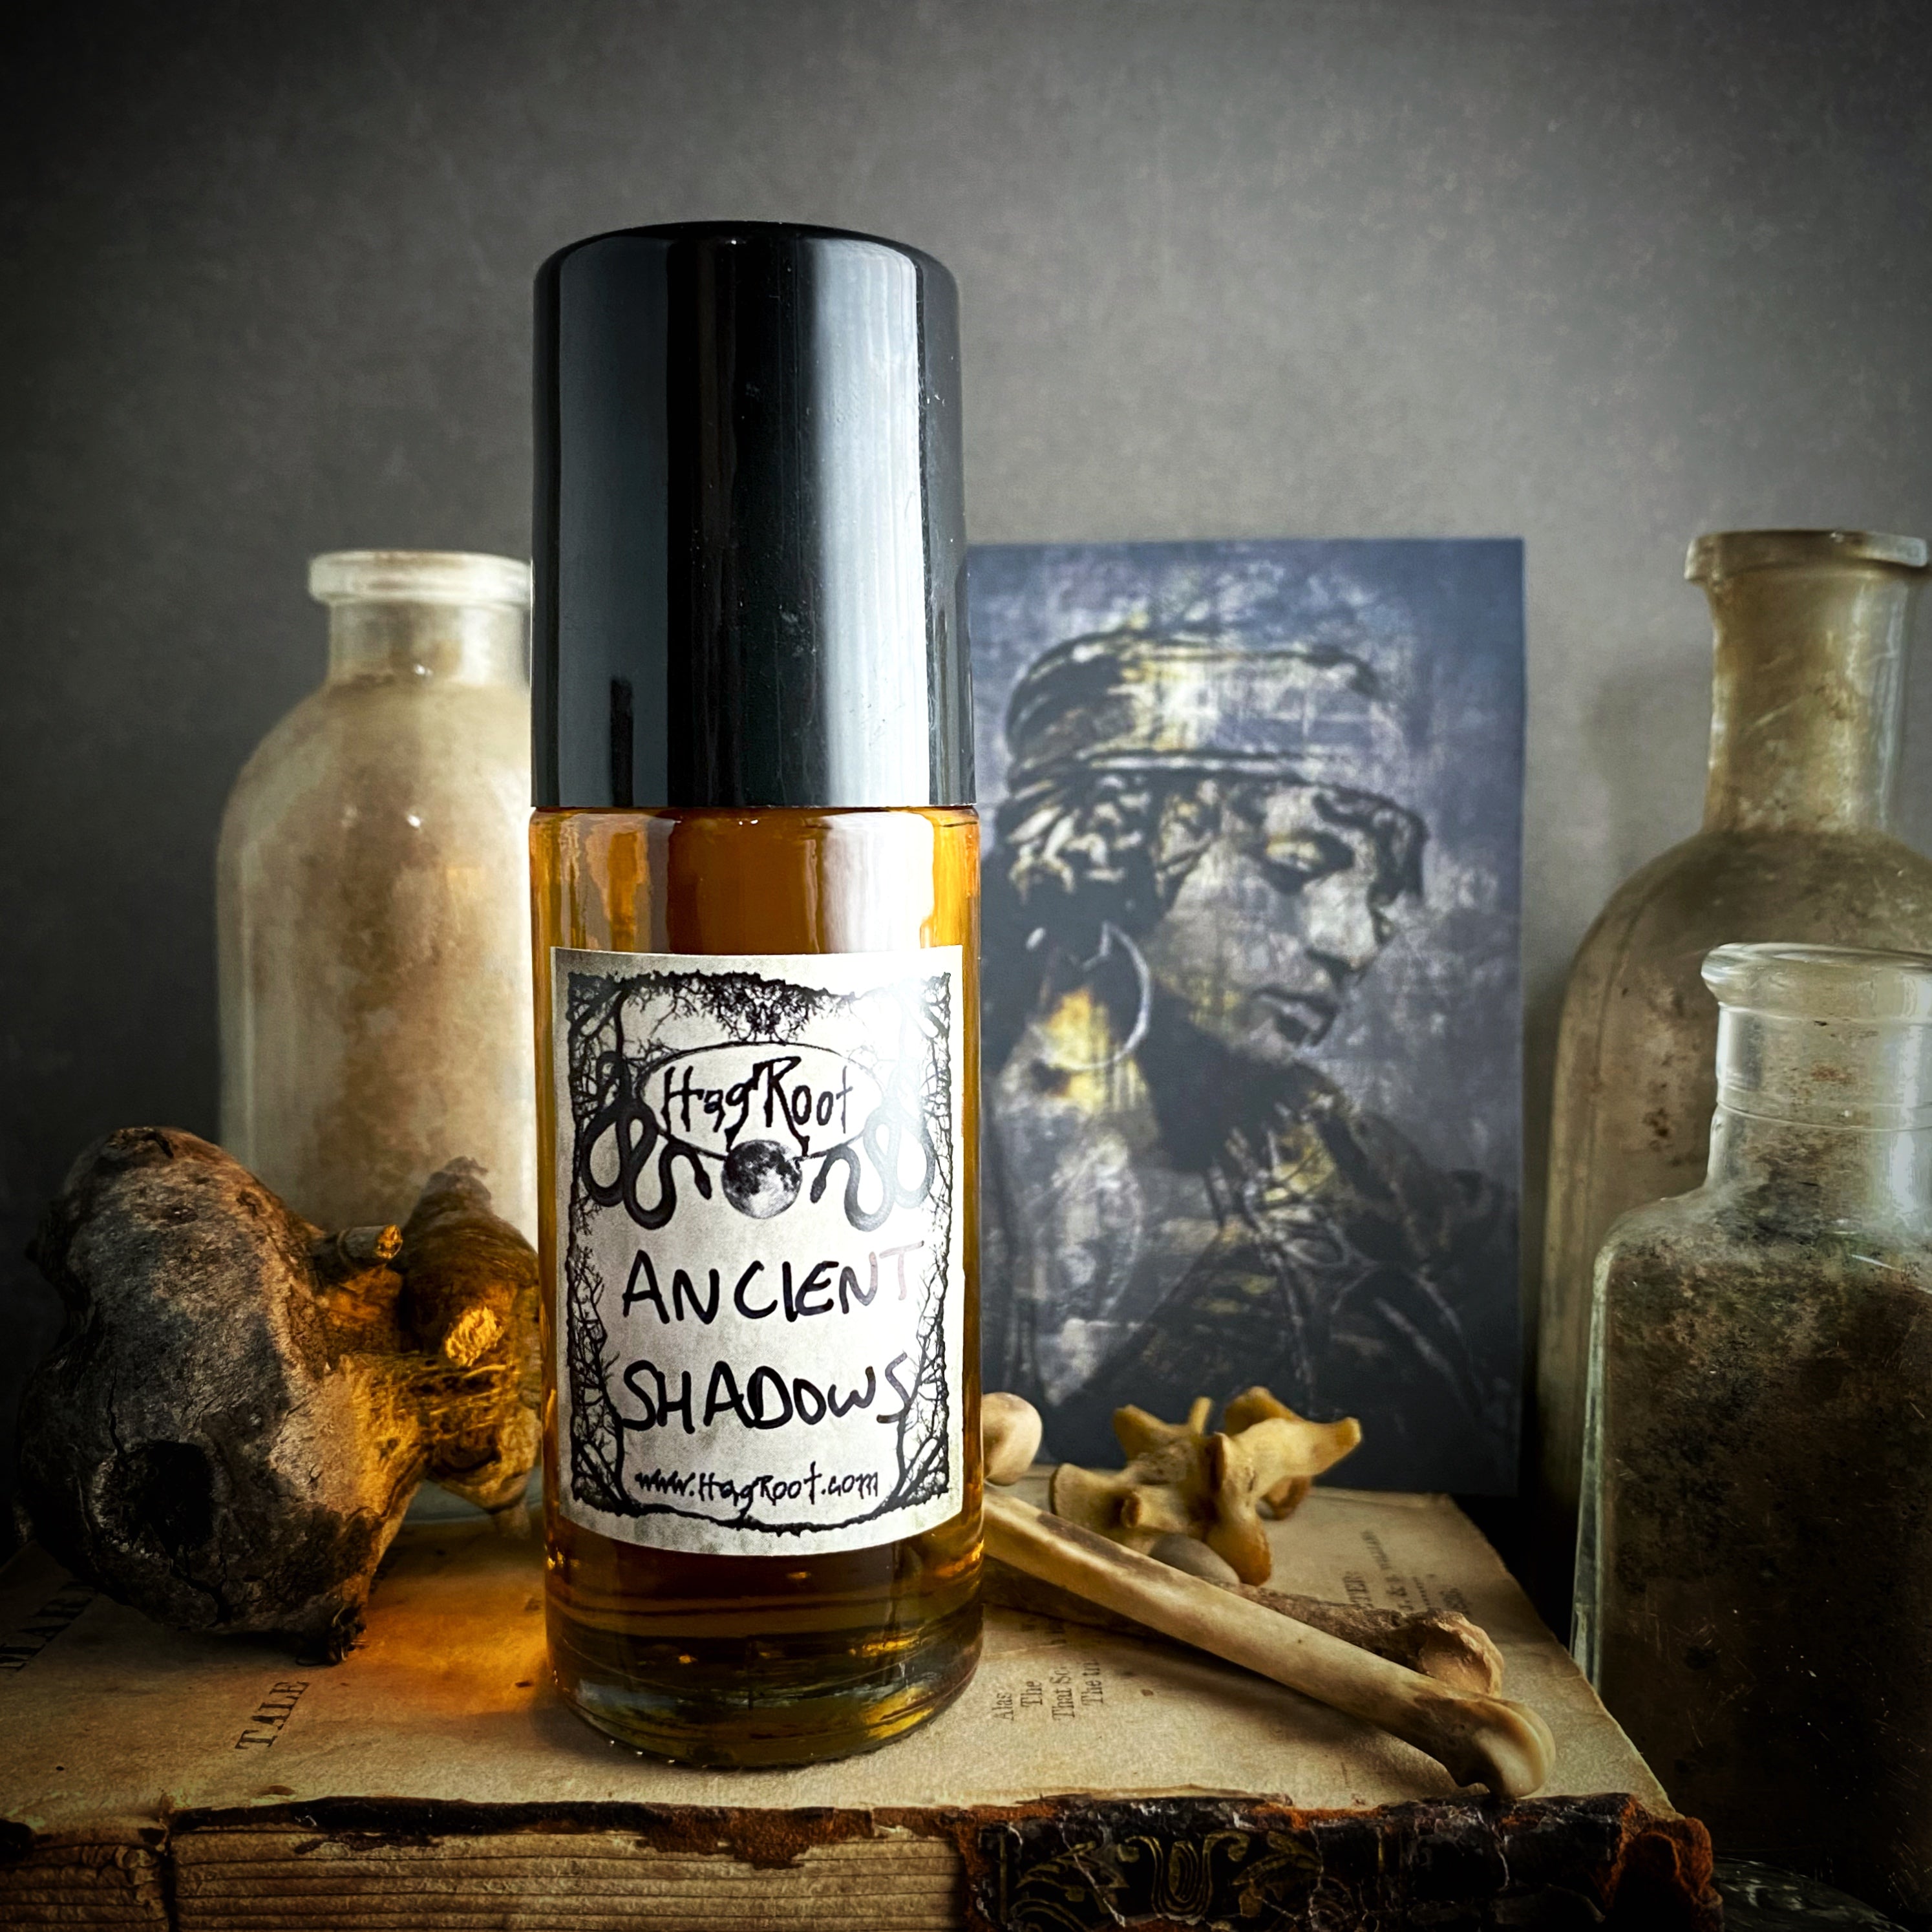 ANCIENT SHADOWS-(Cedar, Smoked Woods, Black Tea Leaves, Leather, Amber, Vanilla)-Perfume, Cologne, Anointing, Ritual Oil